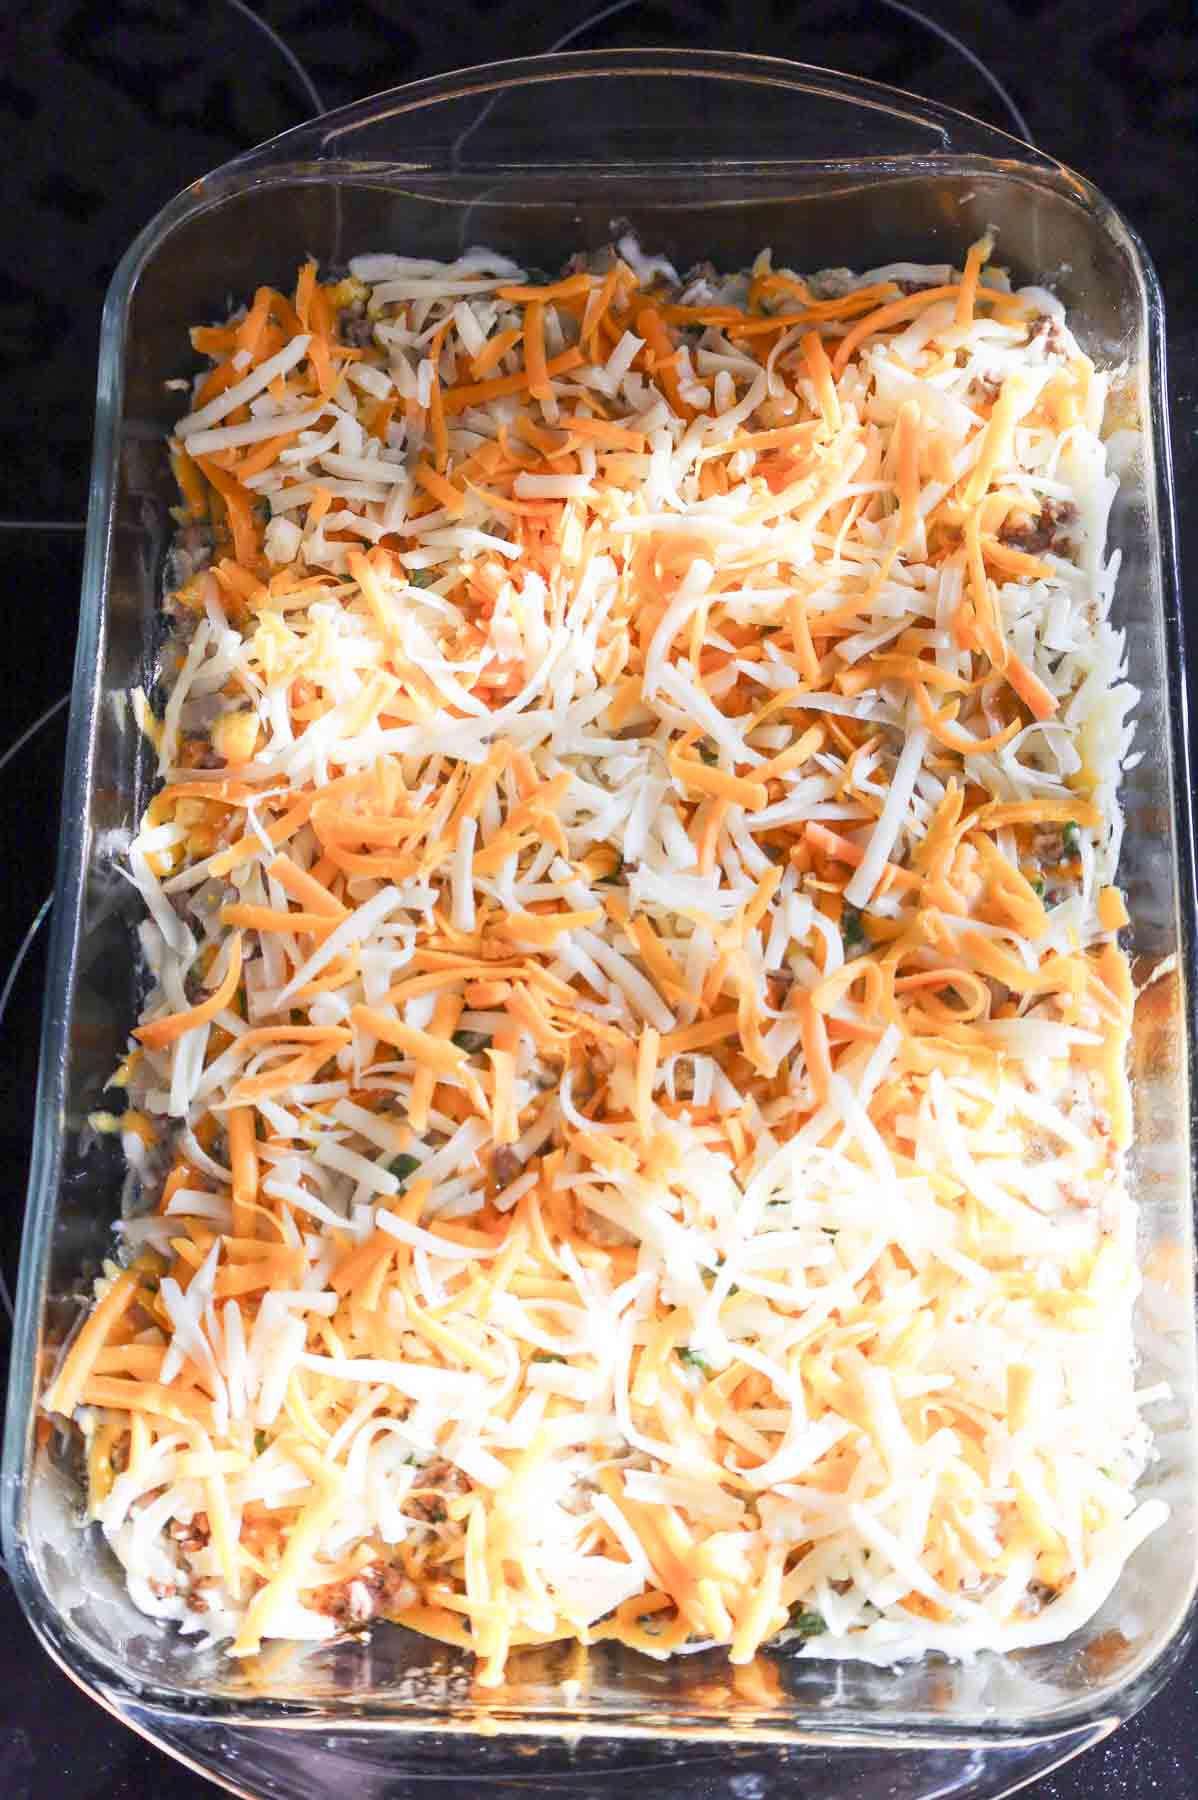 shredded cheese on top of creamy ground beef mixture in a baking dish